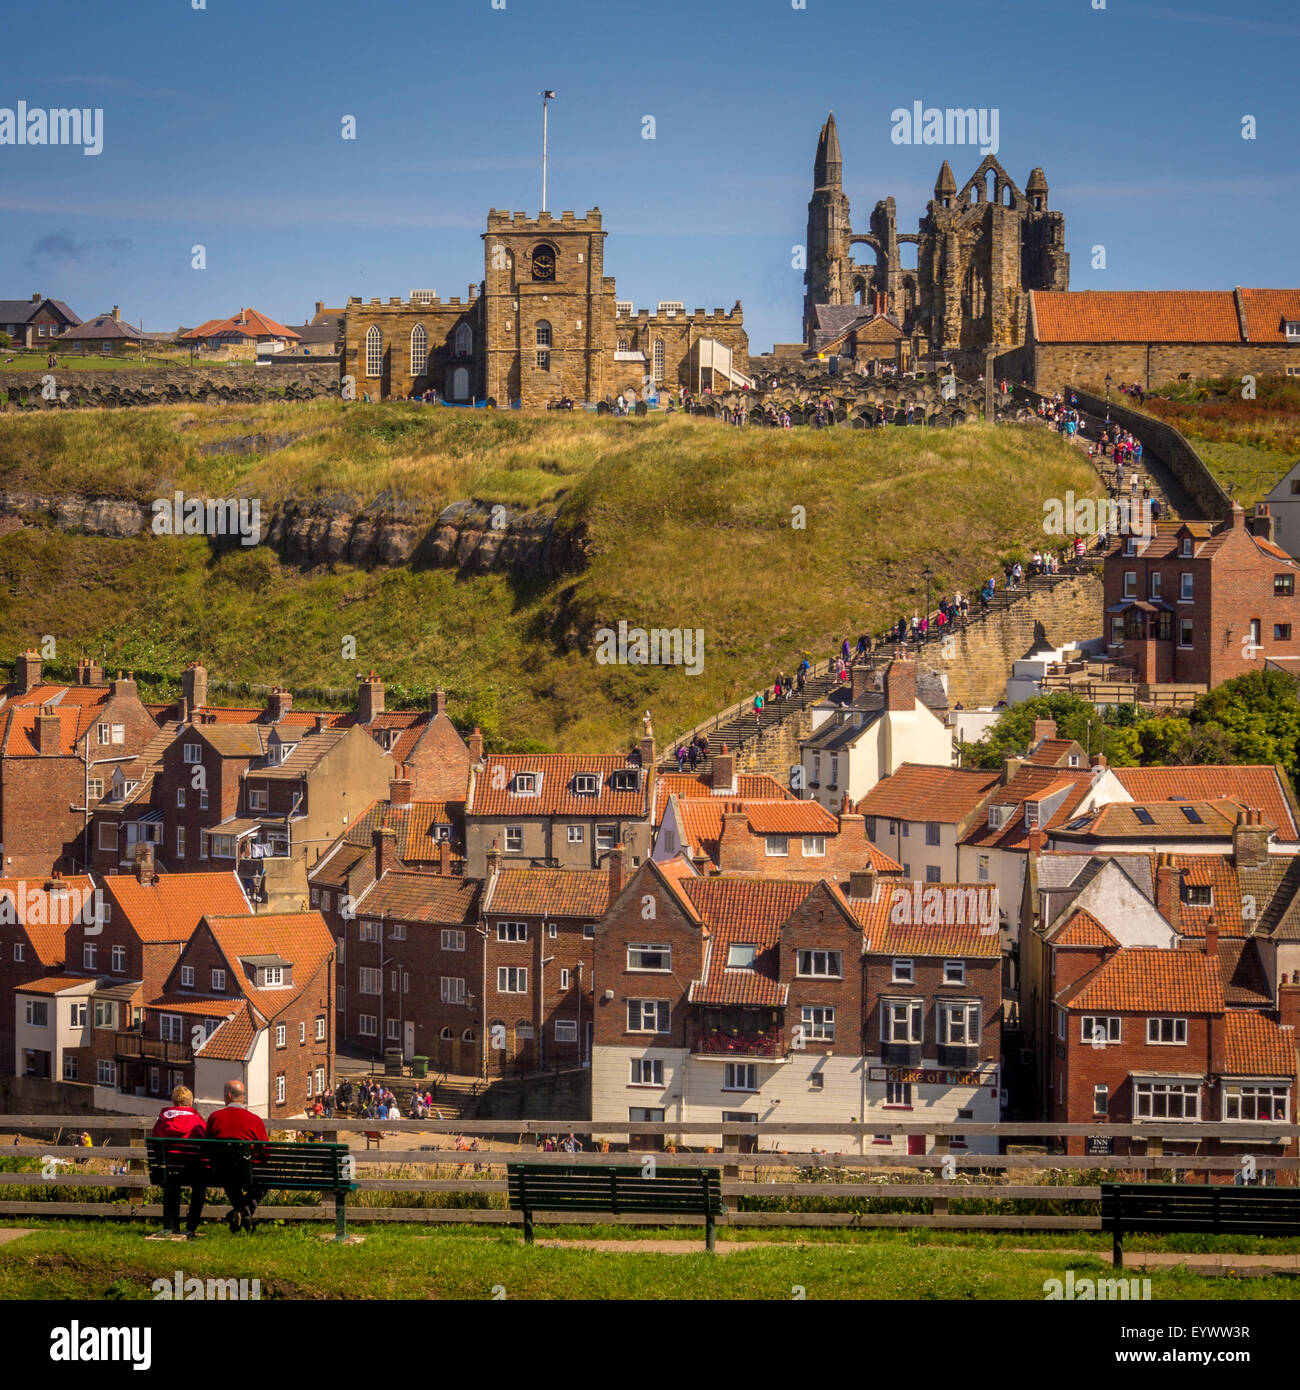 St Mary's Church and Whitby Abbey with riverside buildings in the foreground. Whitby, North Yorkshire. Stock Photo